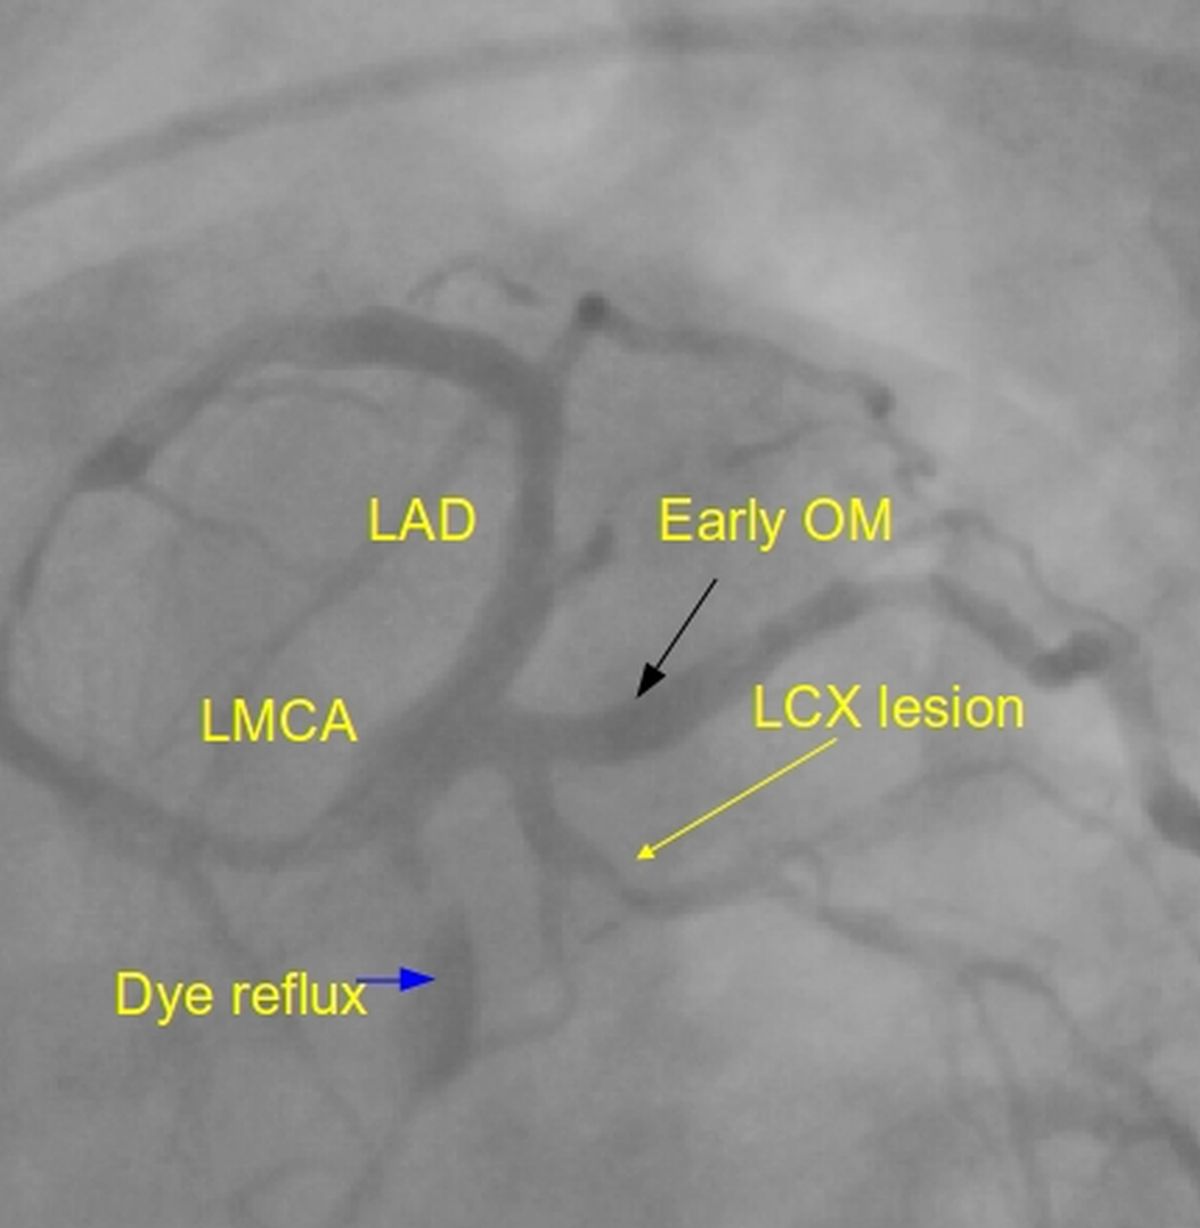 Spider view - LAO caudal view of left coronary angiogram